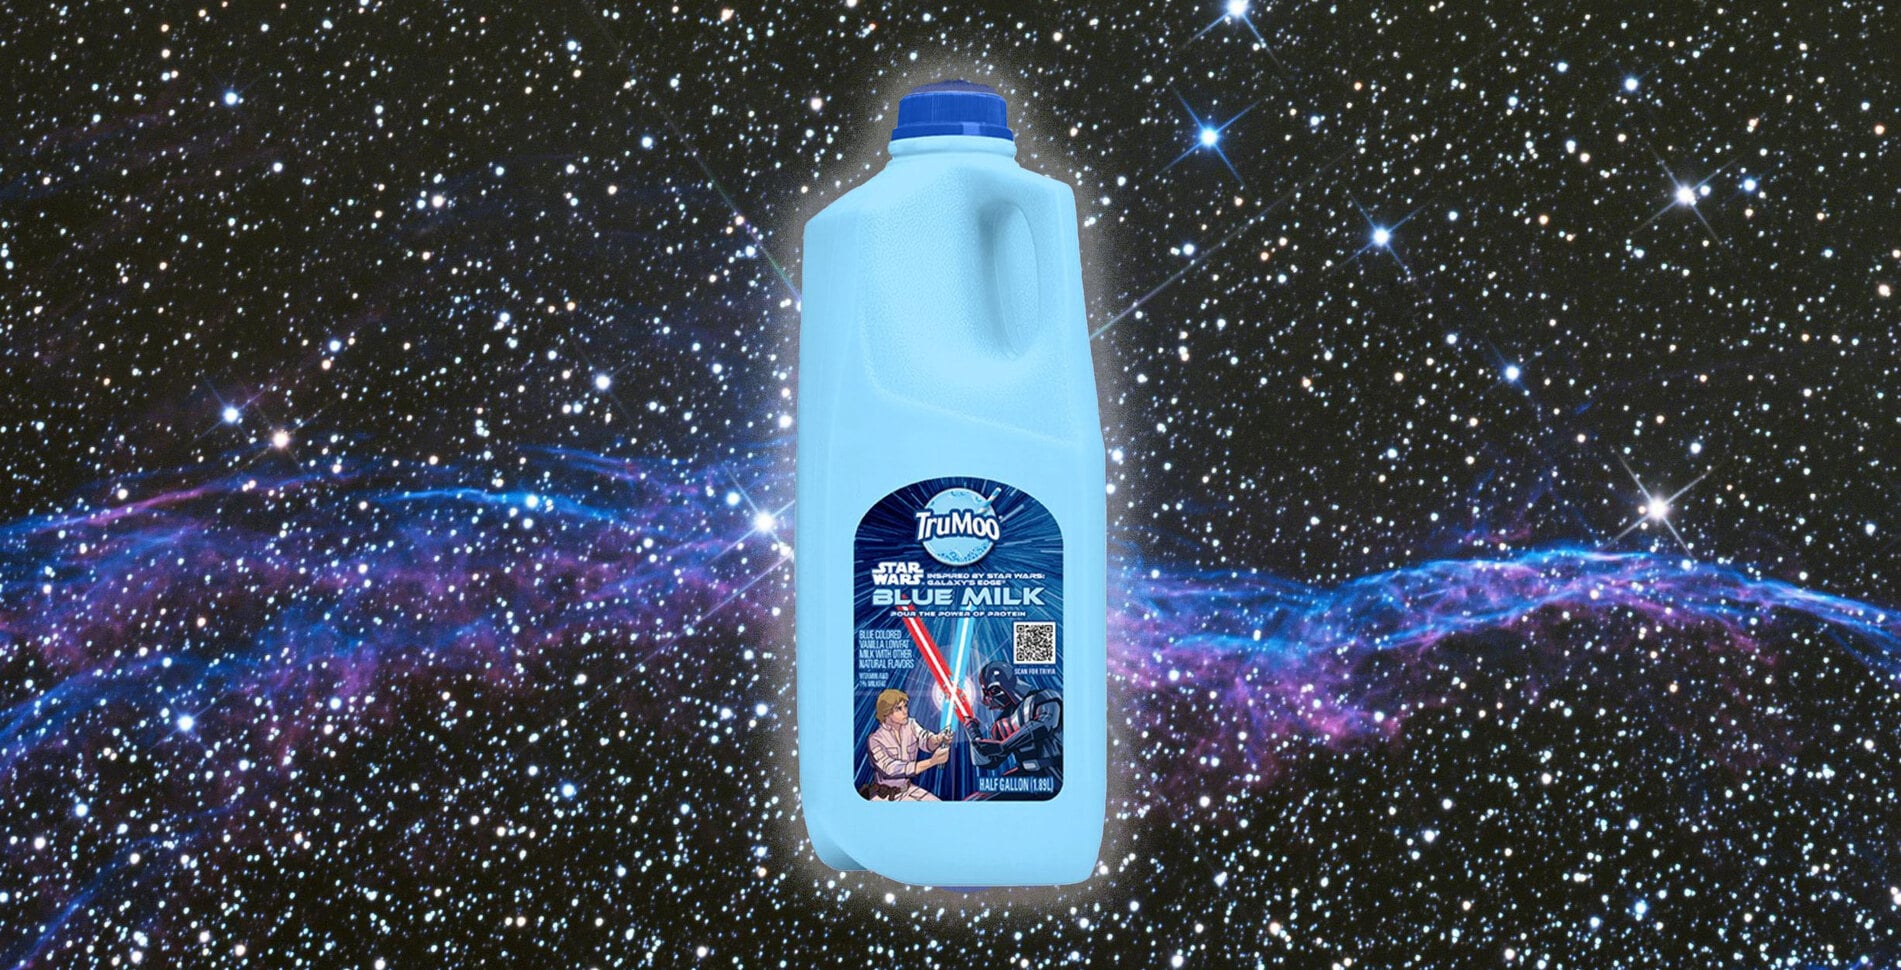 Jedis, Use the Force and Don’t Buy Into the Blue 'Star Wars' Milk Hype